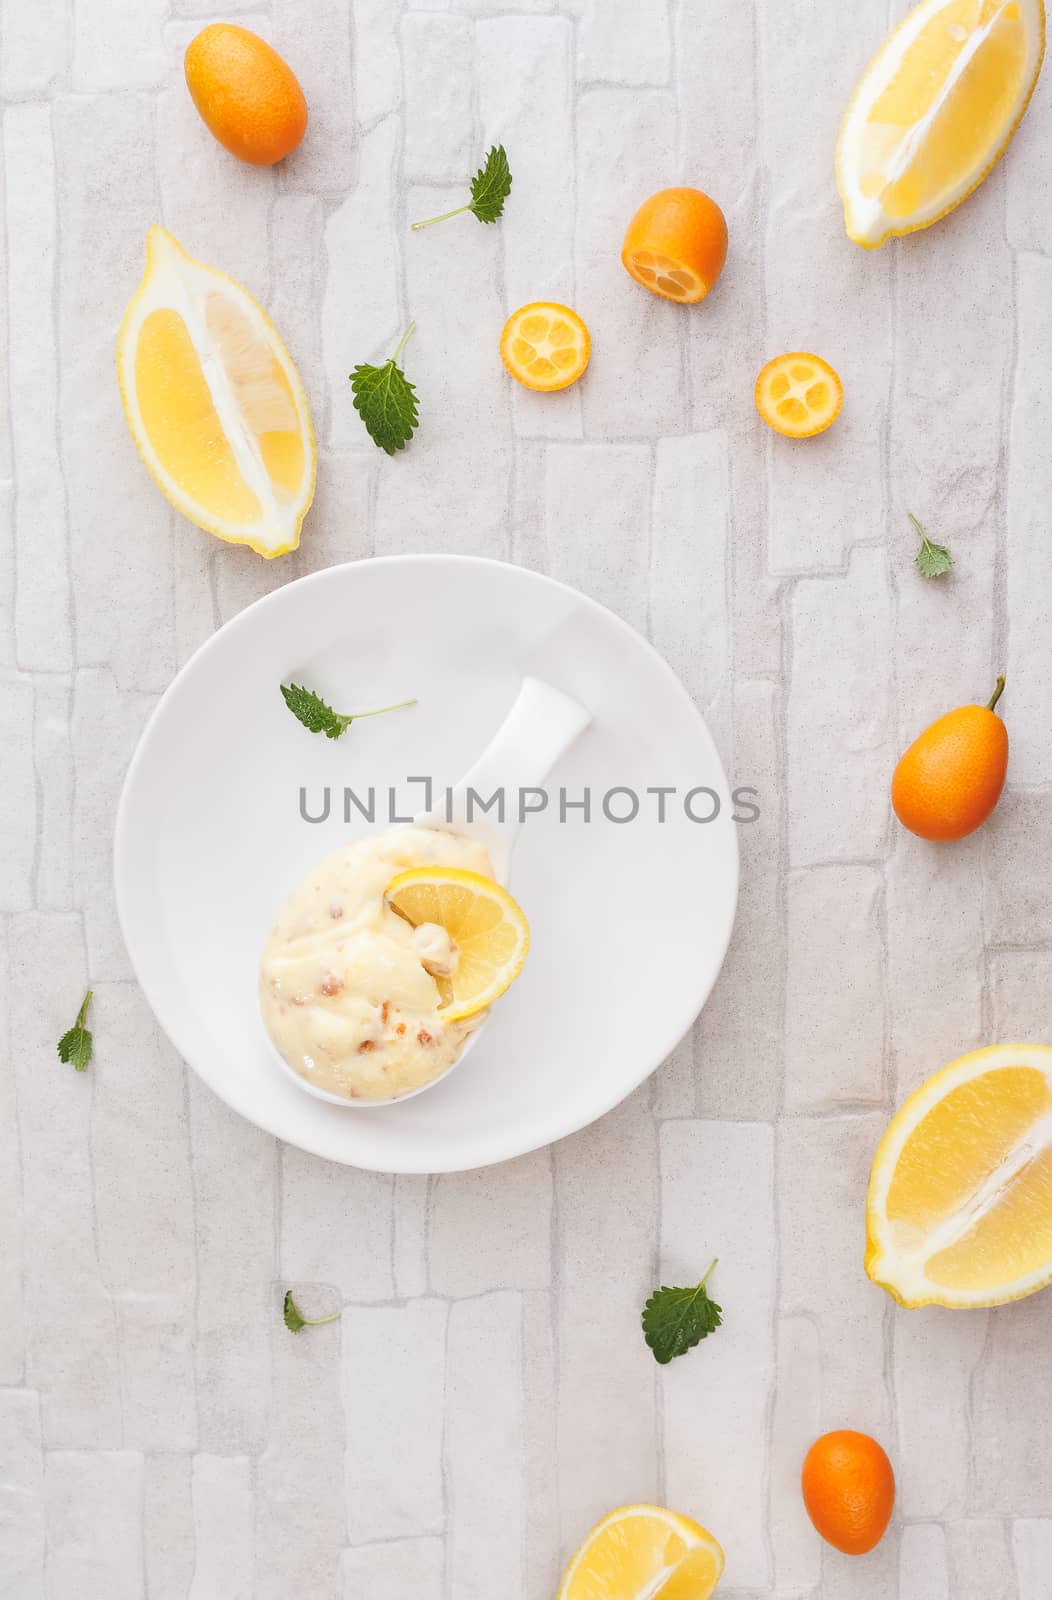 Homemade lemon almond mousse with candied kumquats peel. Top view, blank space, rustic background